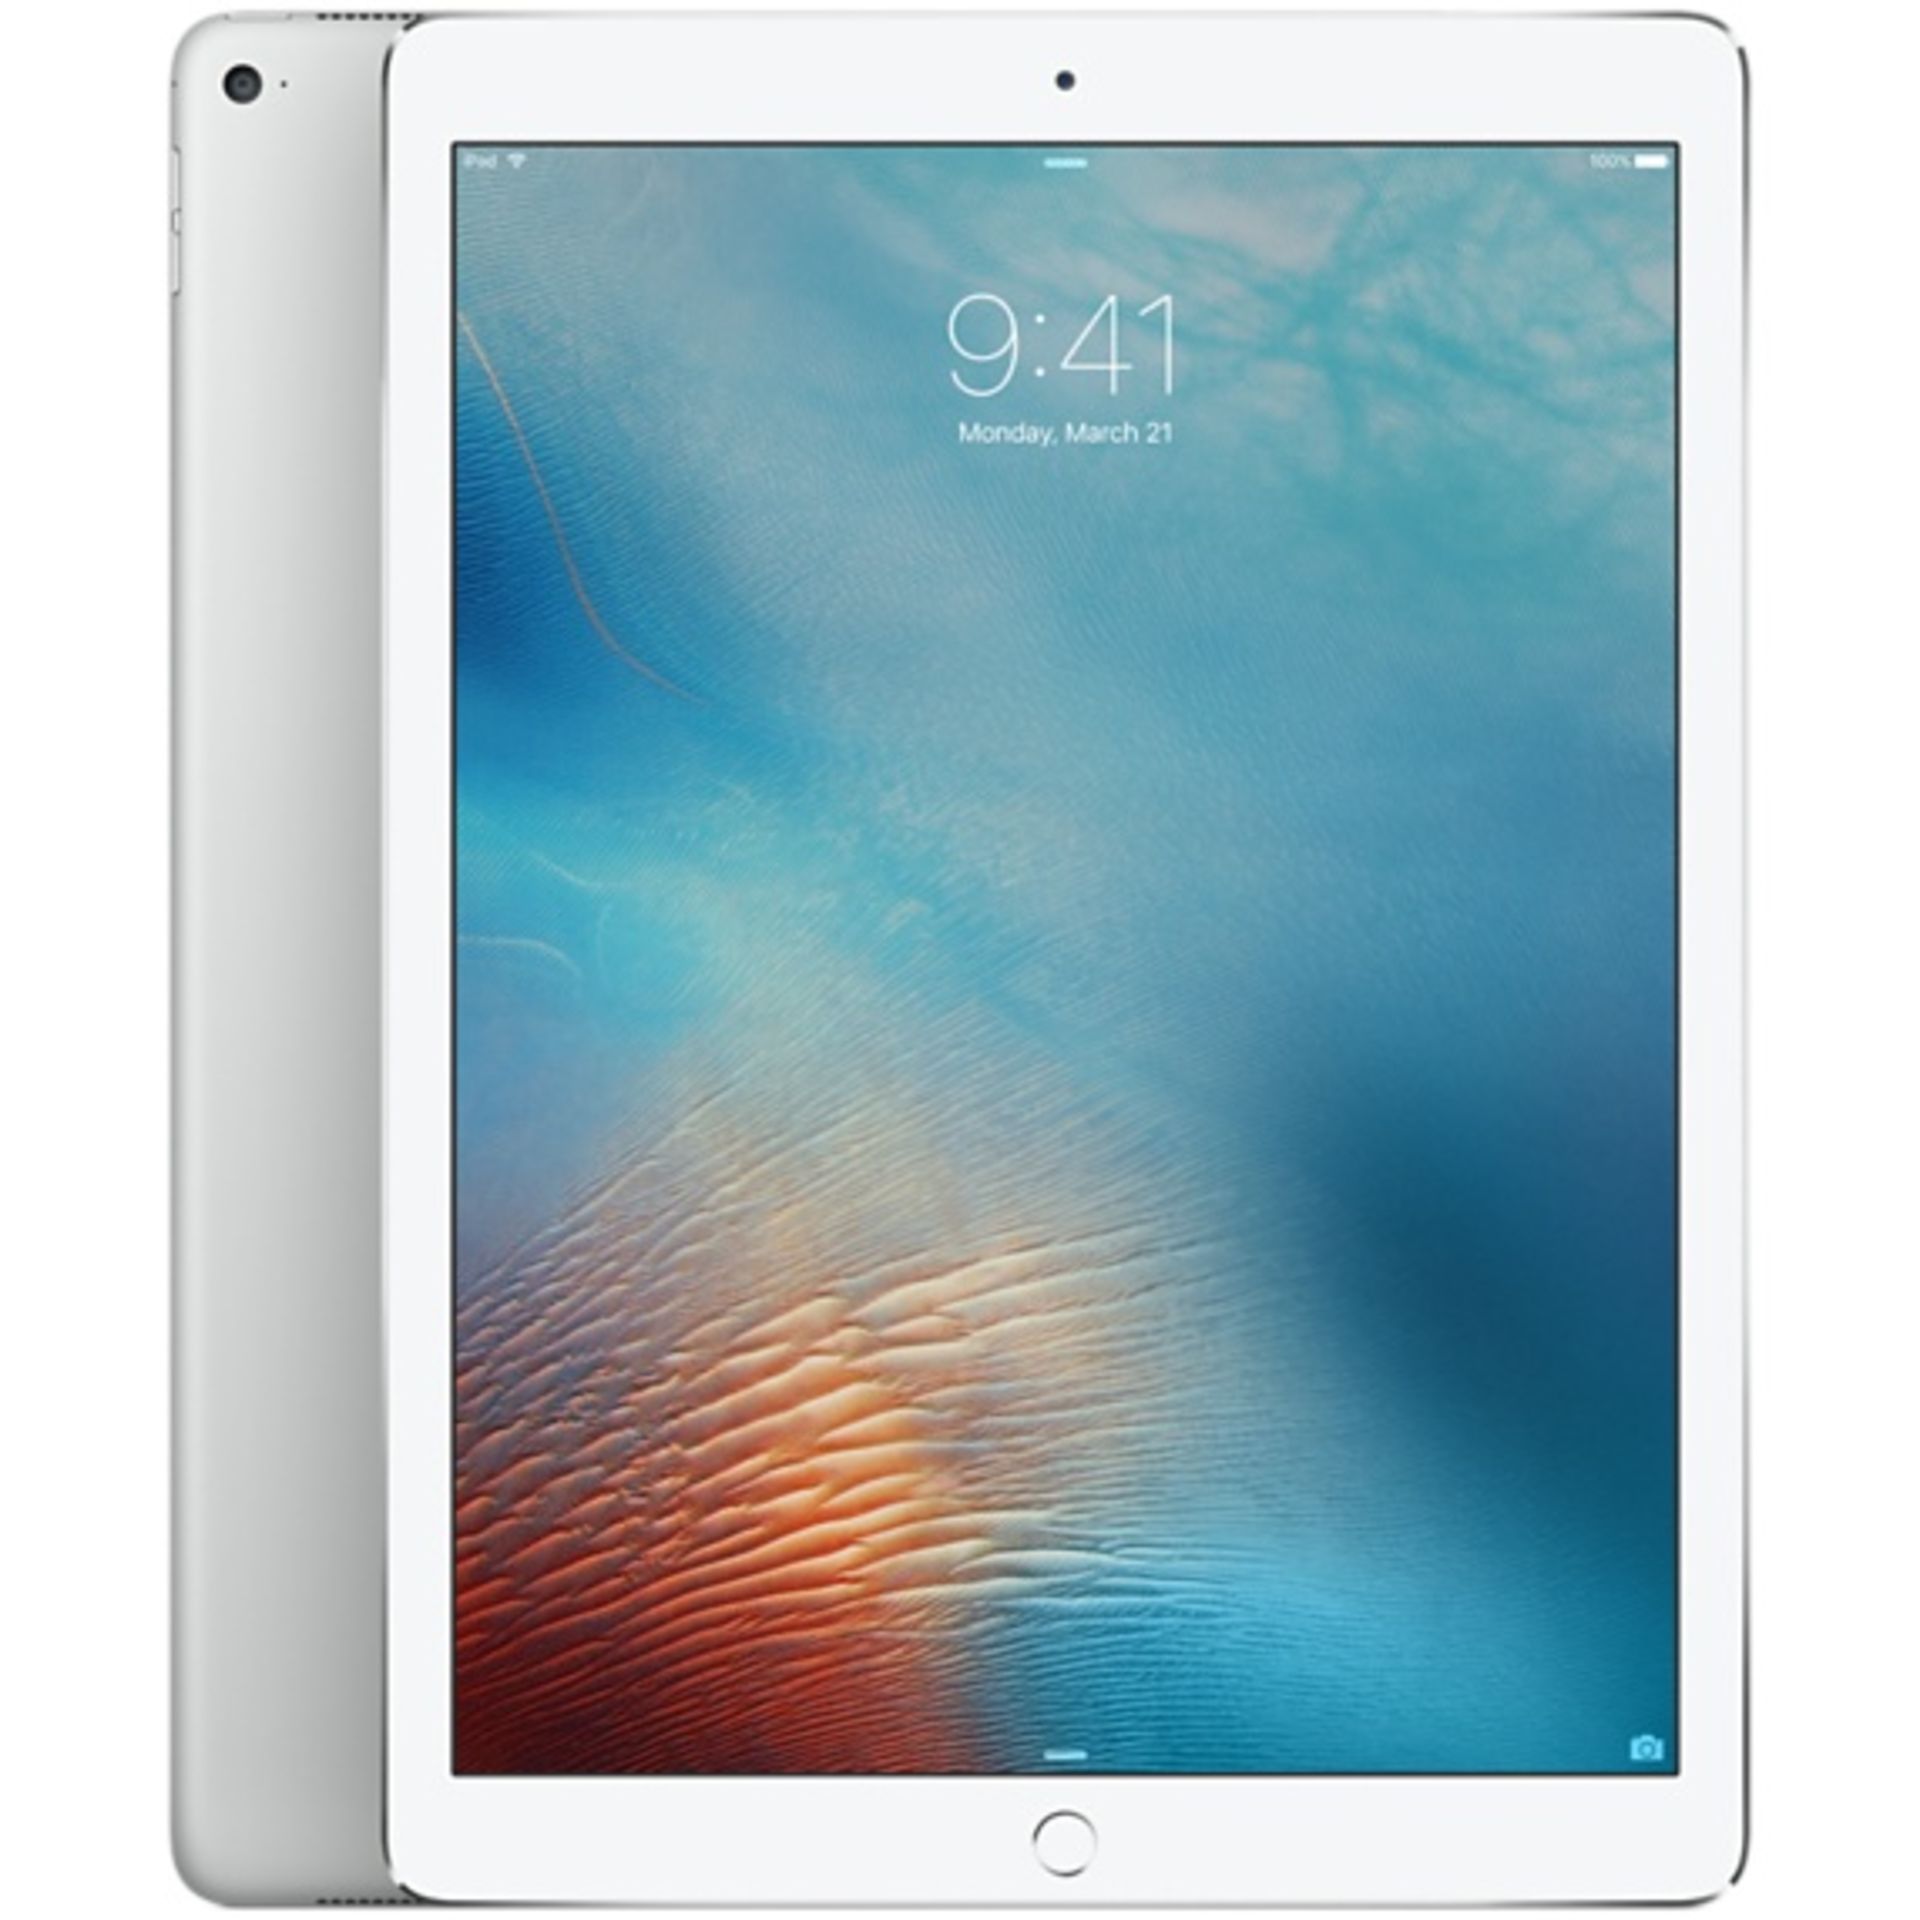 V Grade A Apple iPad Pro 12.9" Silver 32GB - Wi-Fi Only - with accessories and original box X 2 YOUR